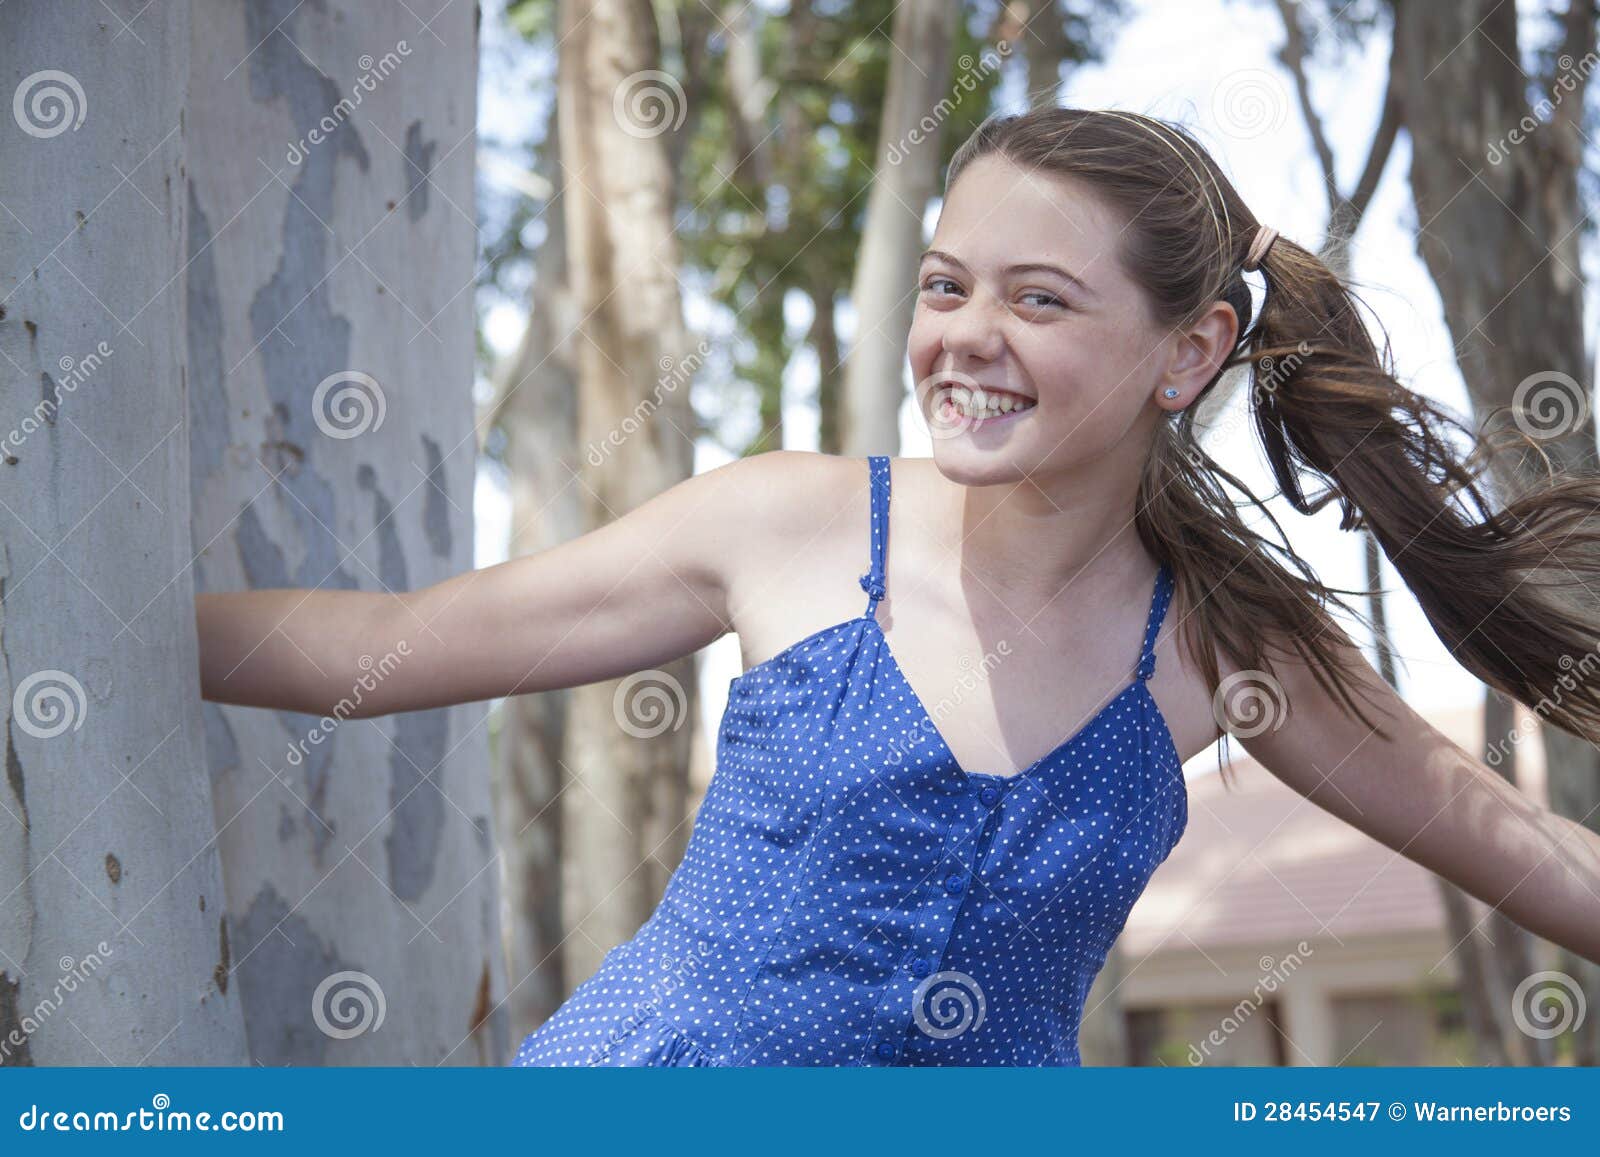 A Young Attractive Girl Playing Hide And Seek In The Woods S